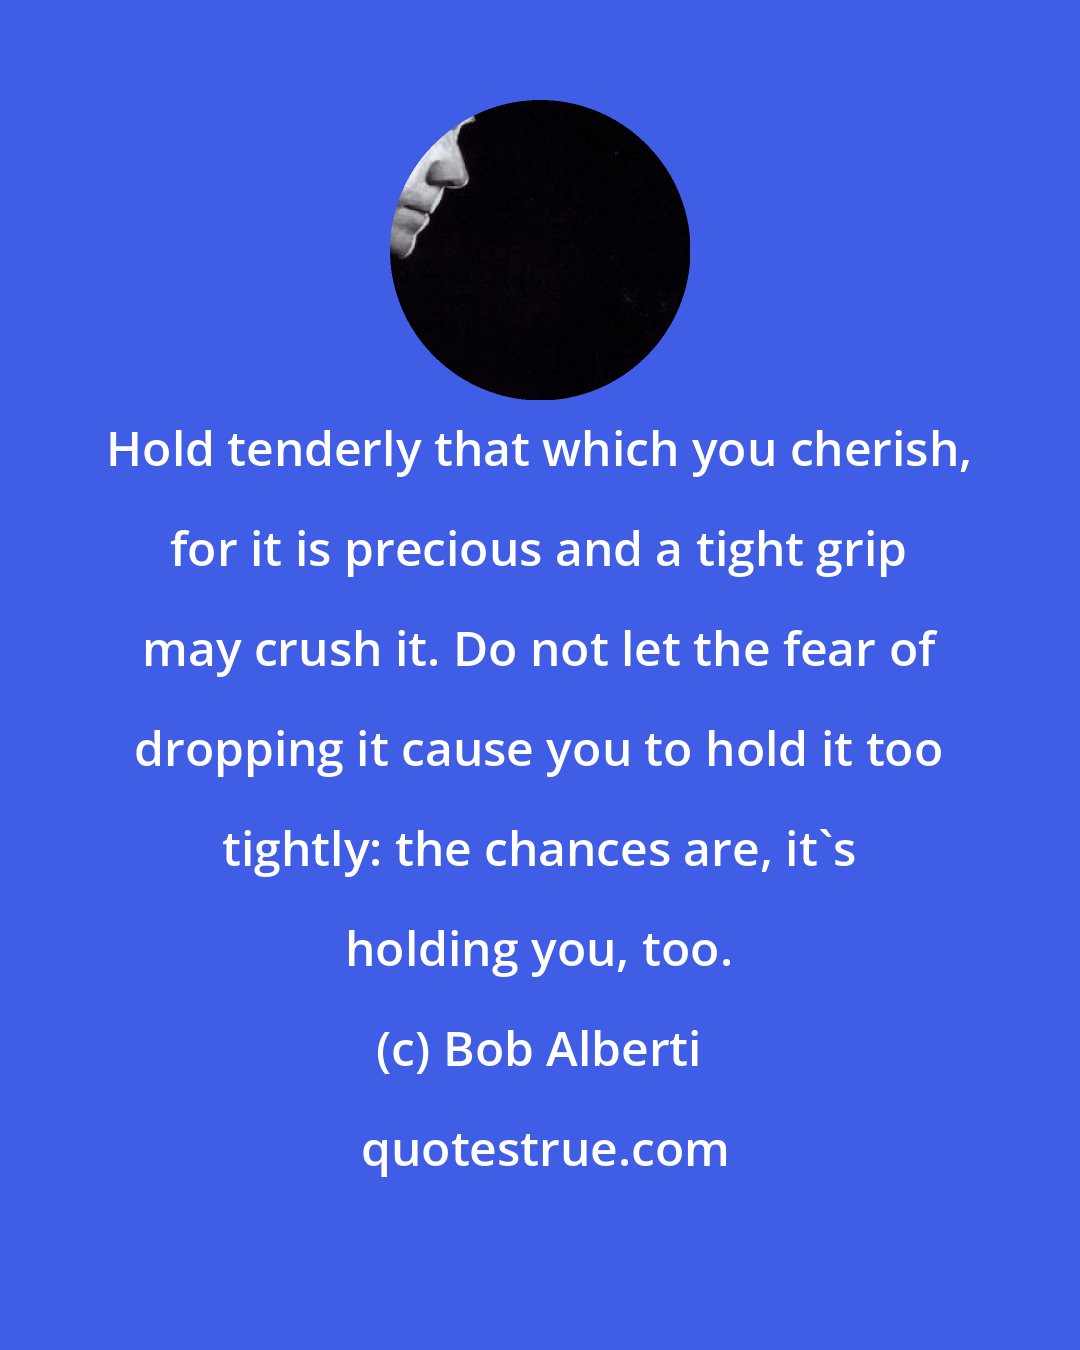 Bob Alberti: Hold tenderly that which you cherish, for it is precious and a tight grip may crush it. Do not let the fear of dropping it cause you to hold it too tightly: the chances are, it's holding you, too.